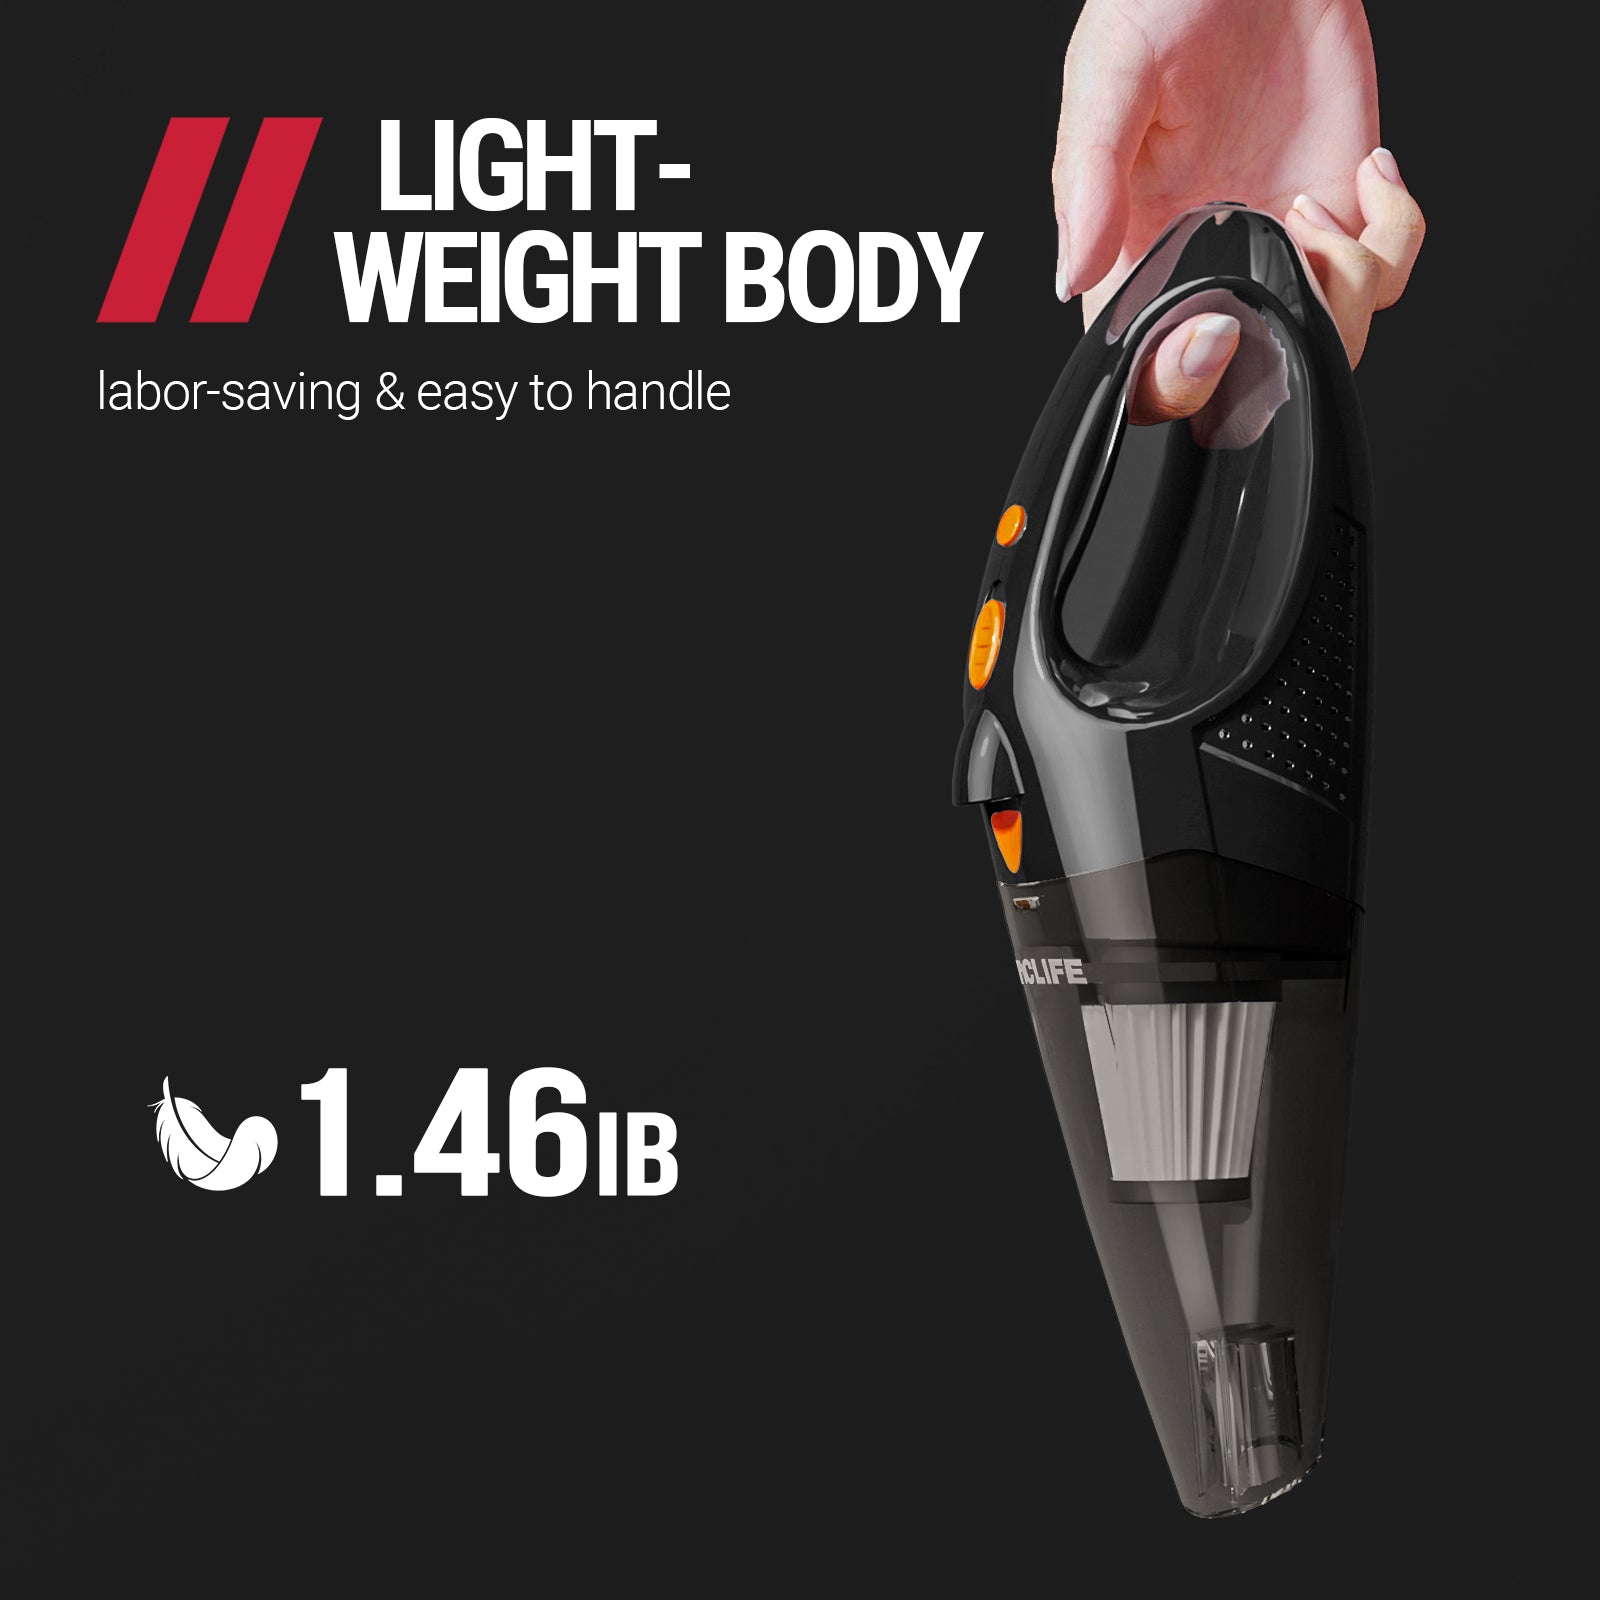 Powools Car Vacuum Cordless Rechargeable - Handheld Vacuum Cleaner by  VacLife High Power with Fast Cahrge Tech, Portable Vacuum with  Large-Capacity